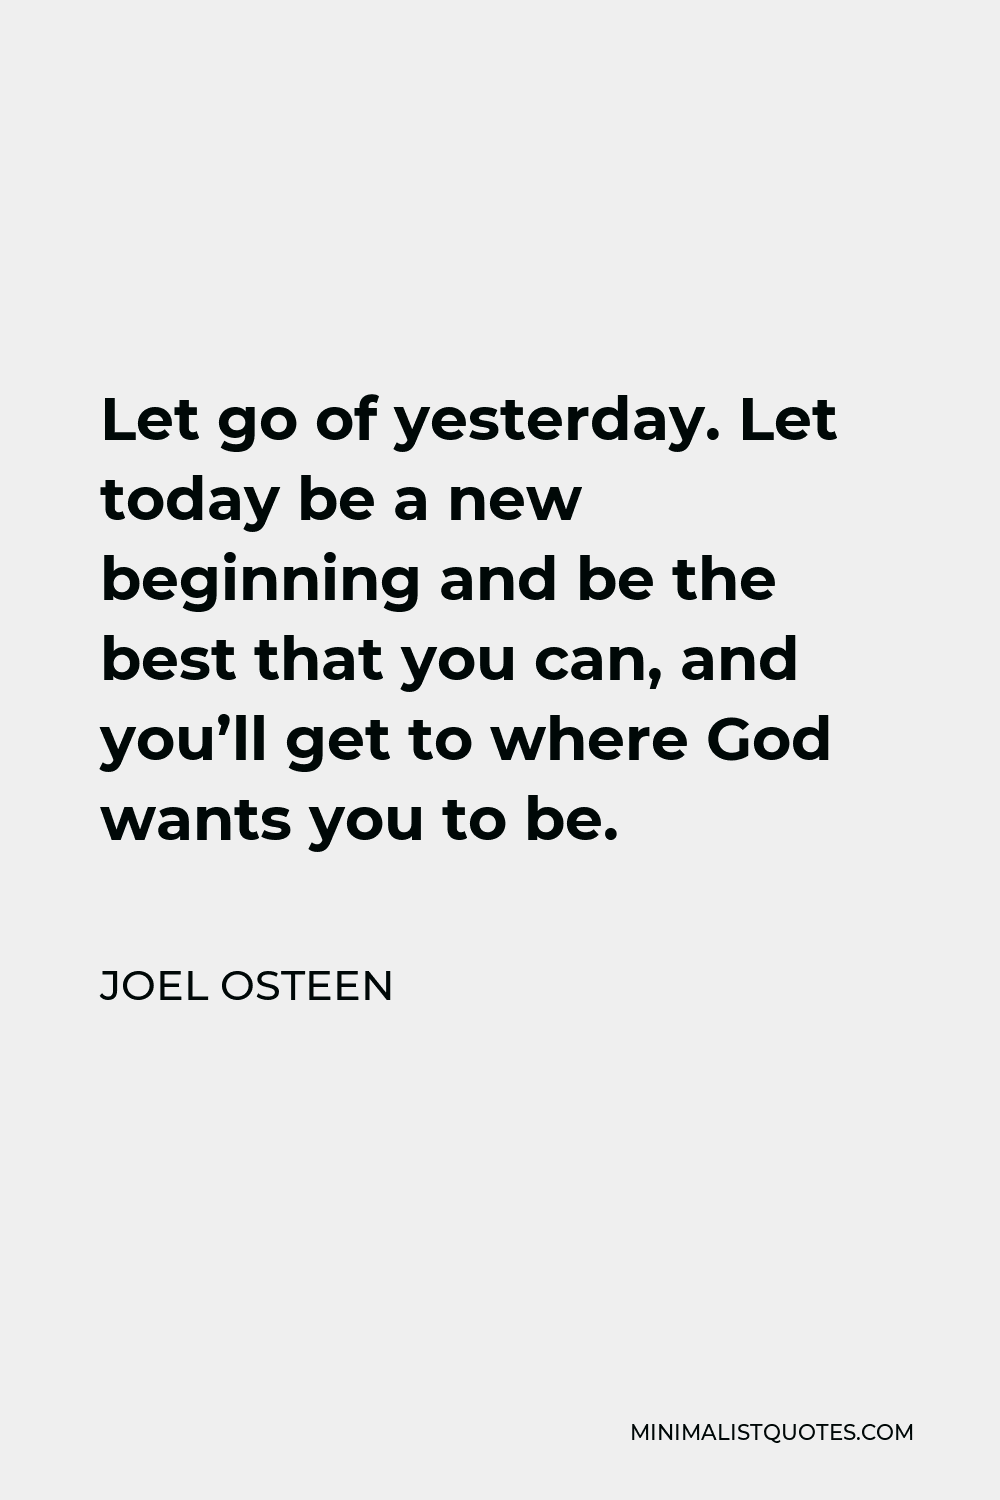 Joel Osteen Quote - Let go of yesterday. Let today be a new beginning and be the best that you can, and you’ll get to where God wants you to be.